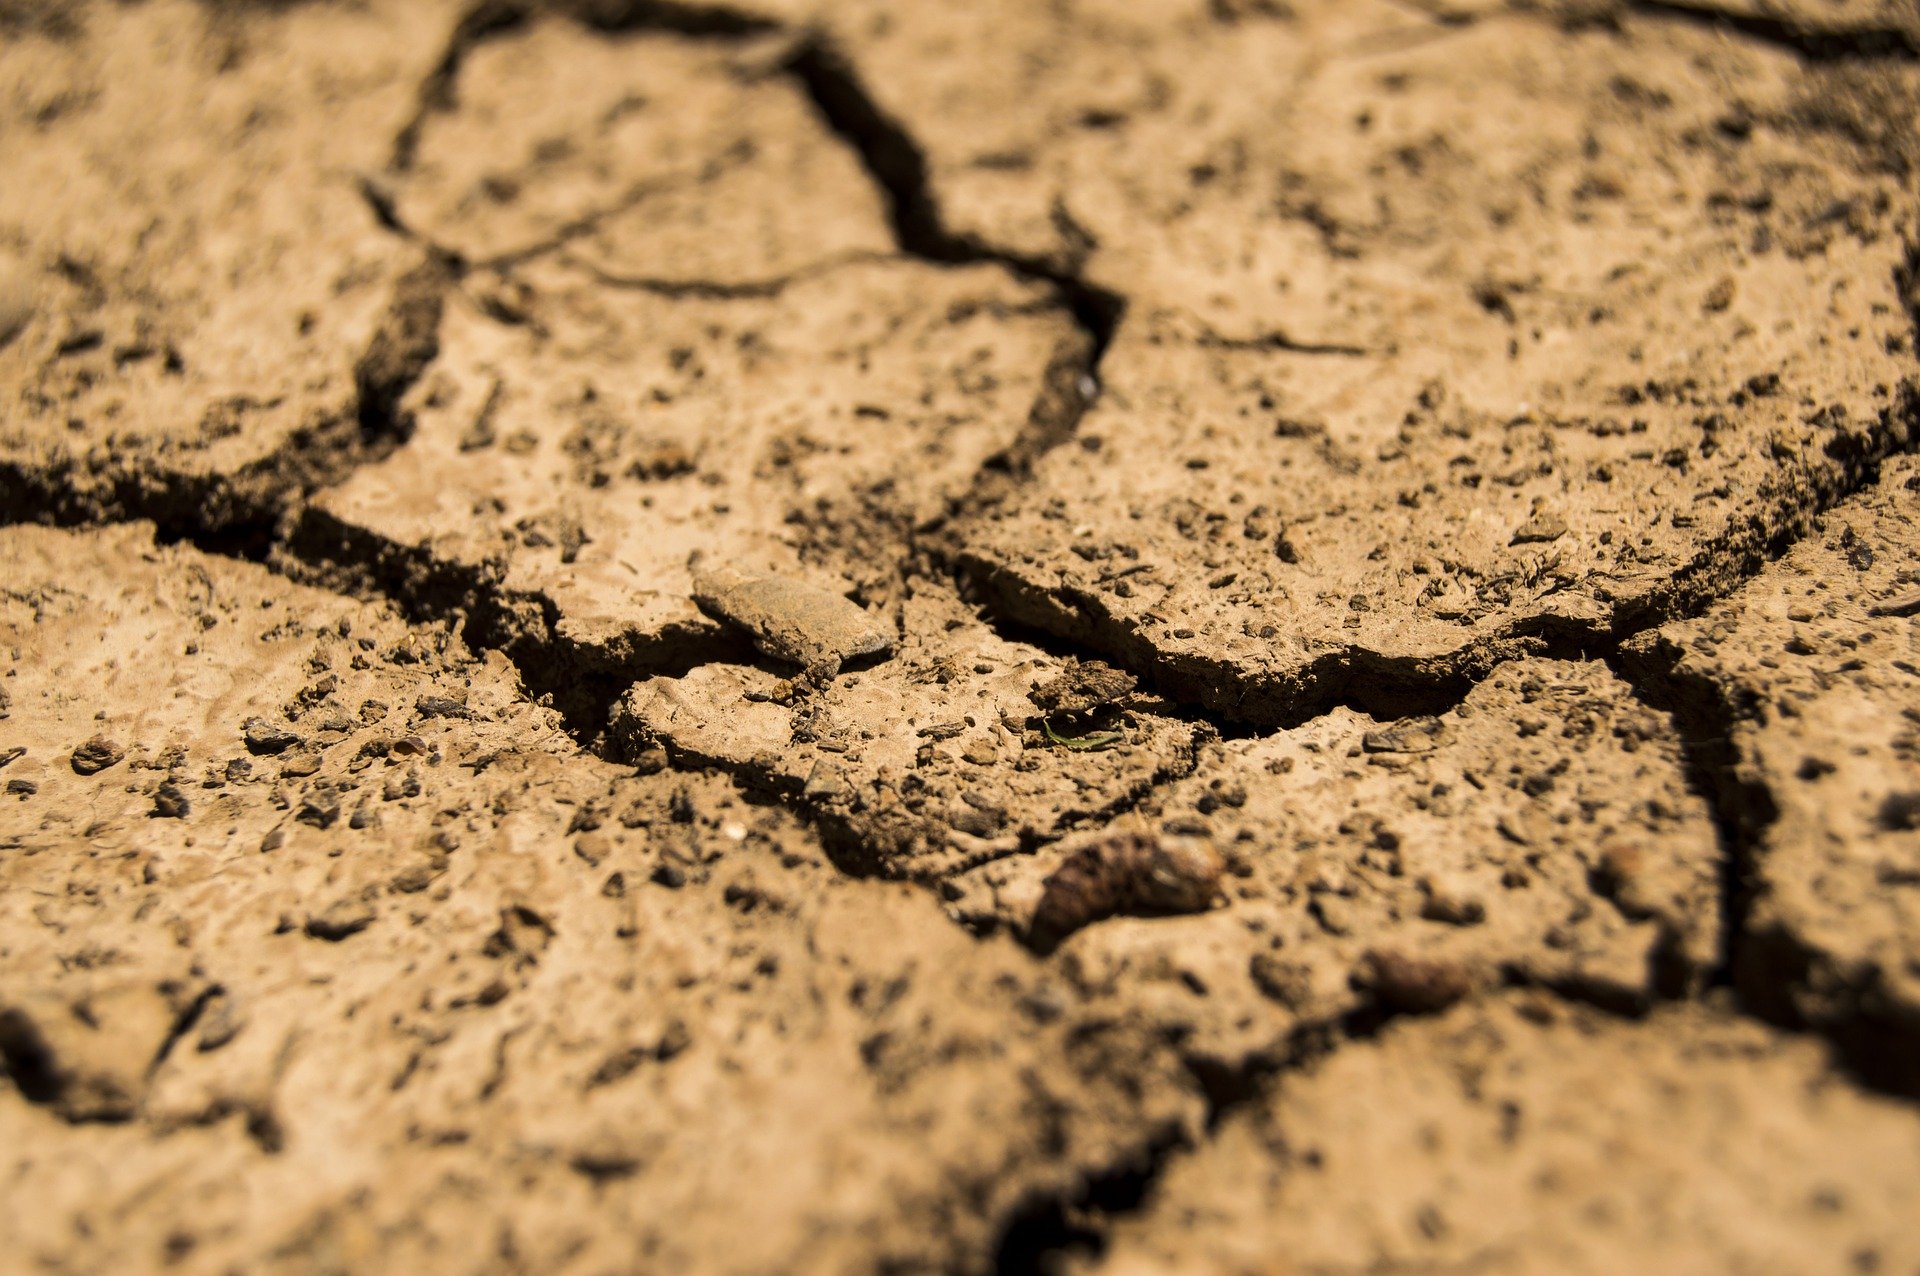 A close-up of cracked mud.